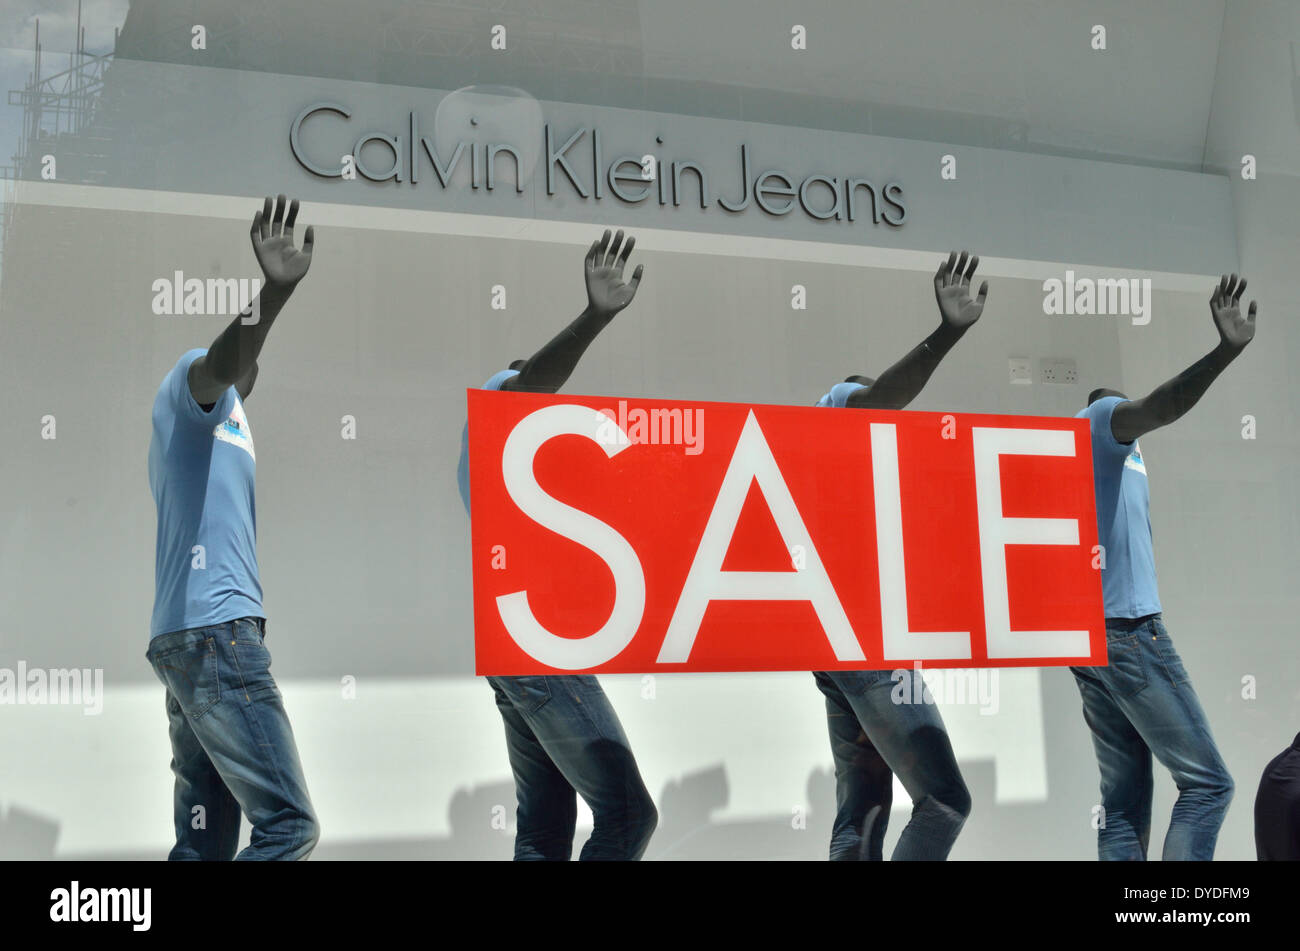 Calvin Klein Jeans sale sign in a shop window Stock Photo - Alamy